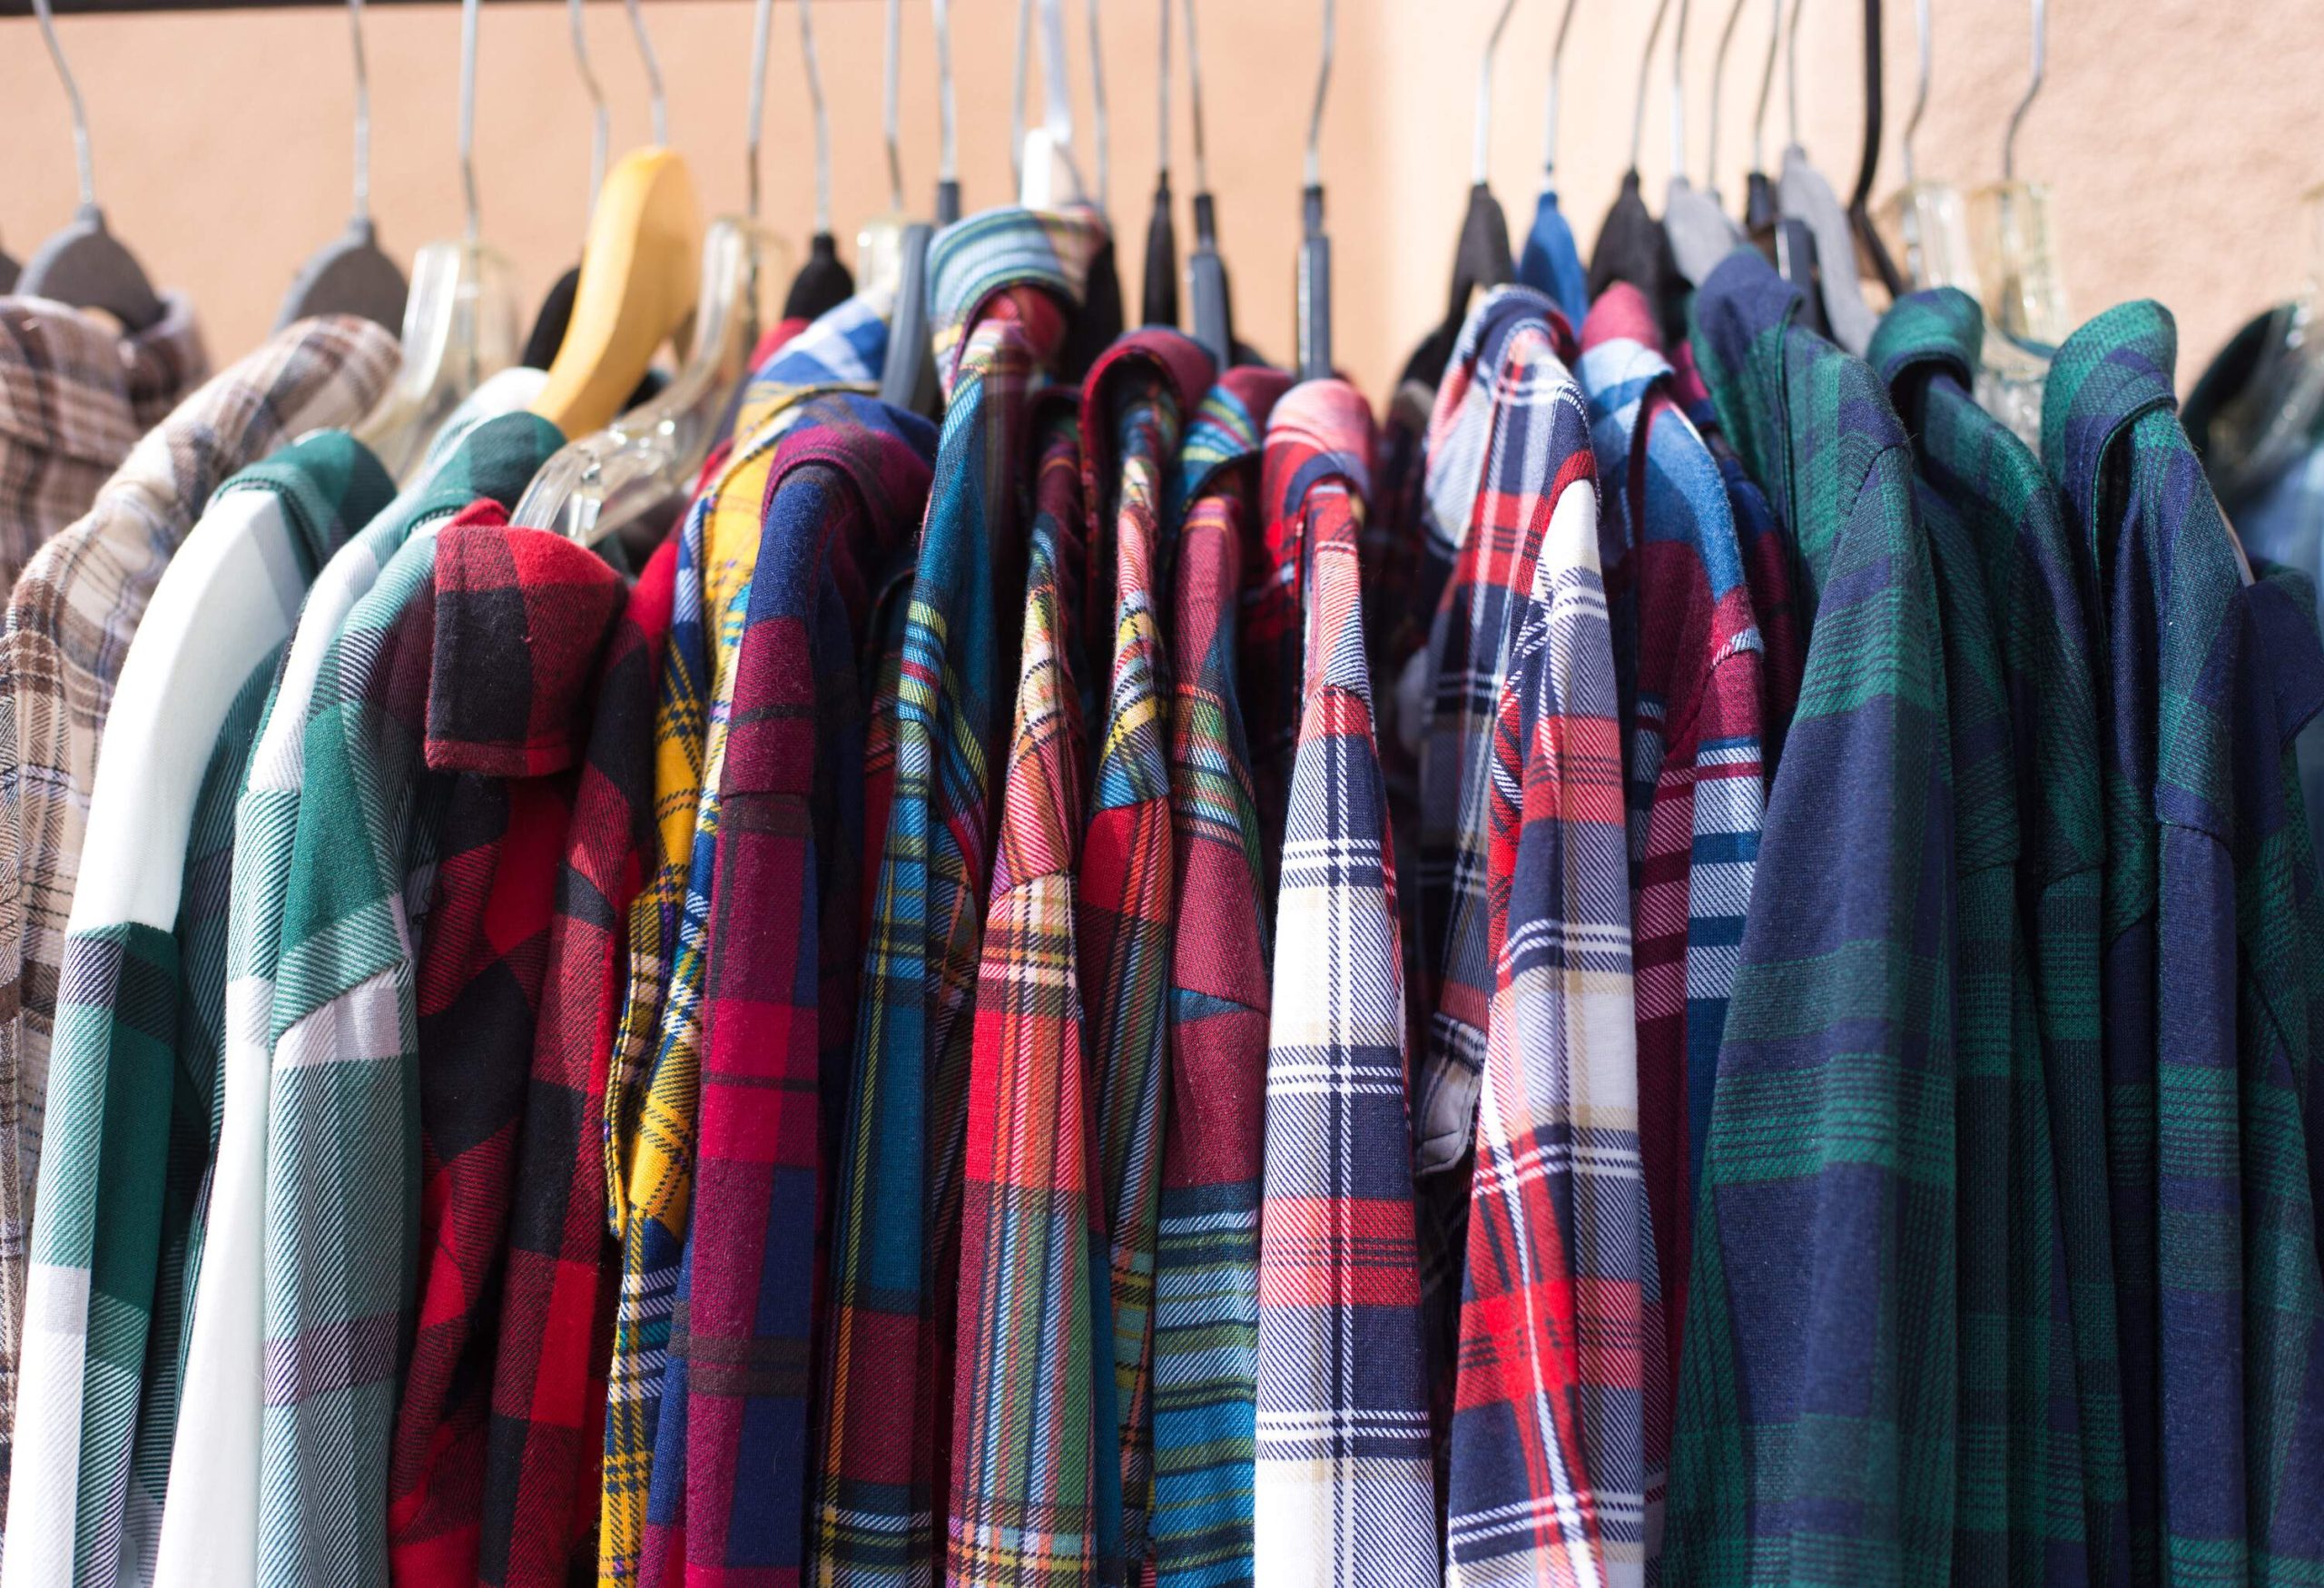 A display of hanged colourful plaid shirts.